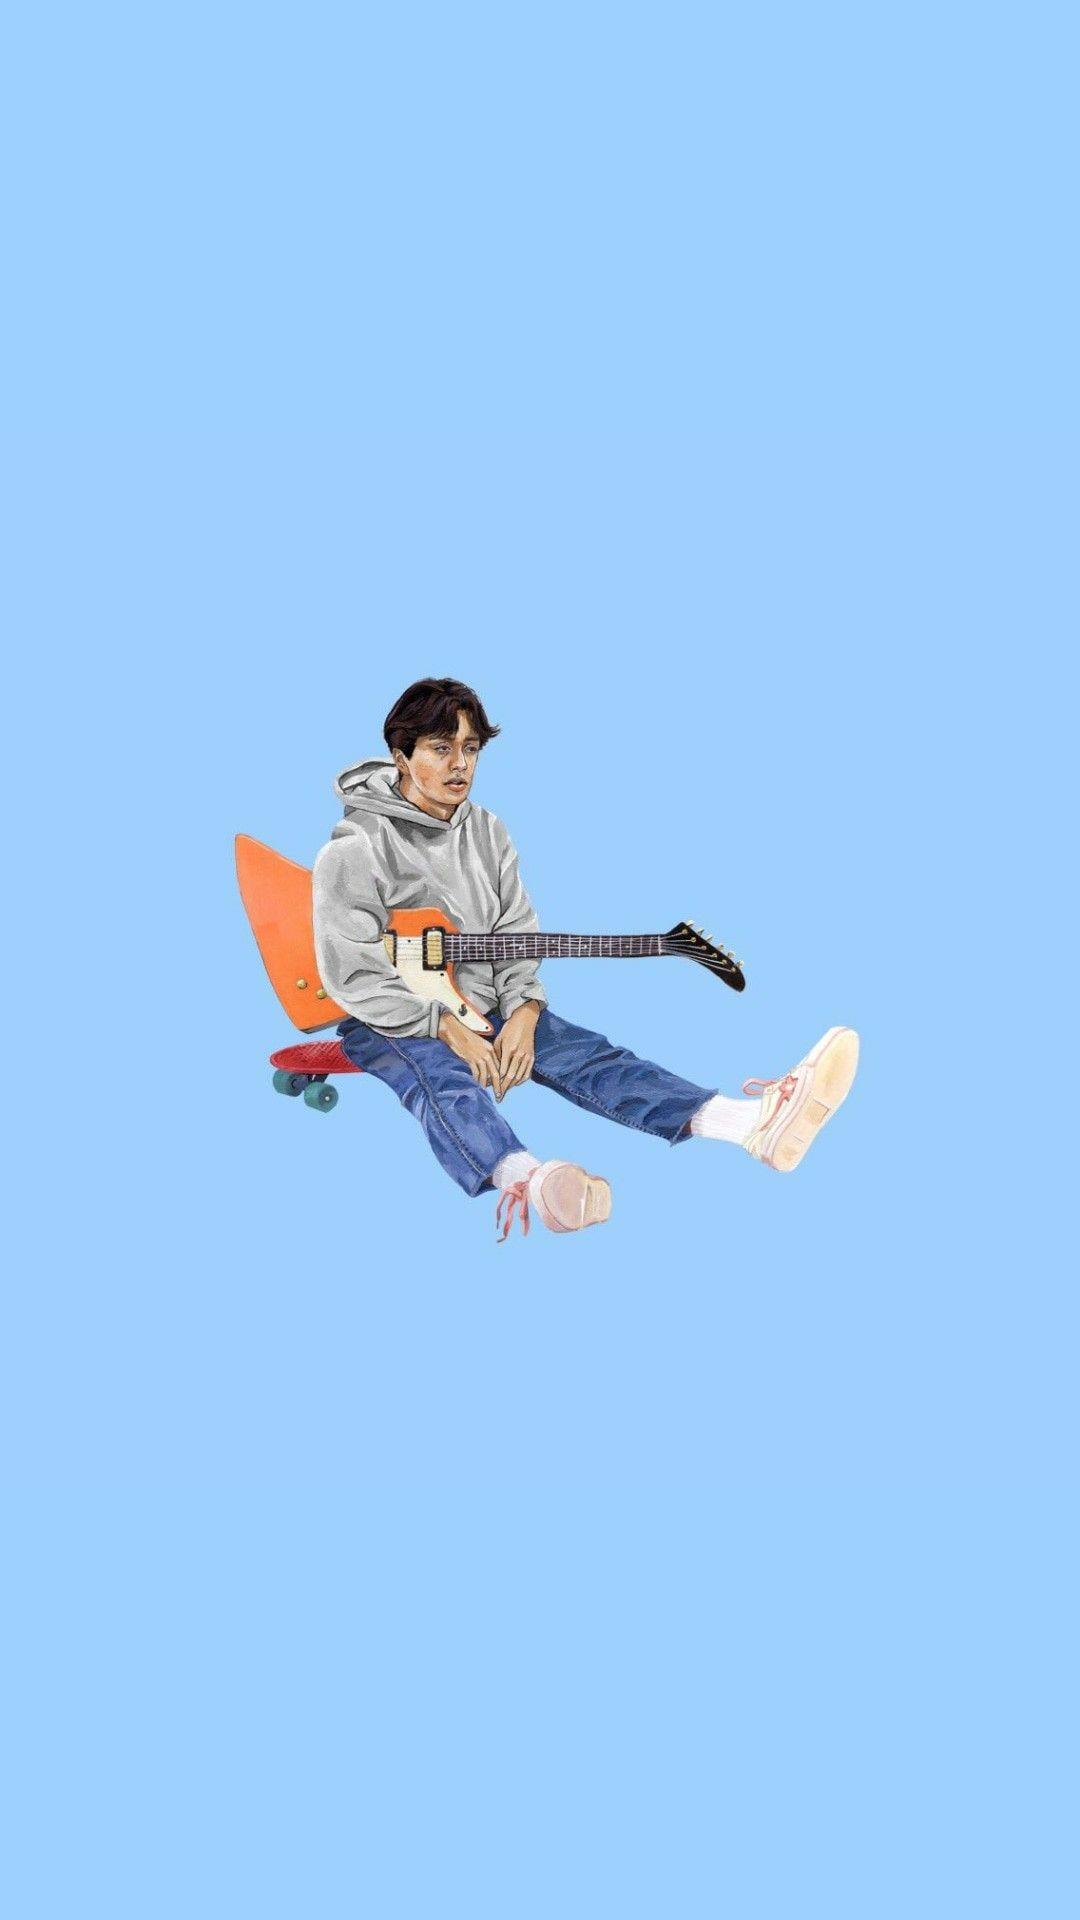 Ayee ive been loving boy pablo's new album Soy Pablo. Music